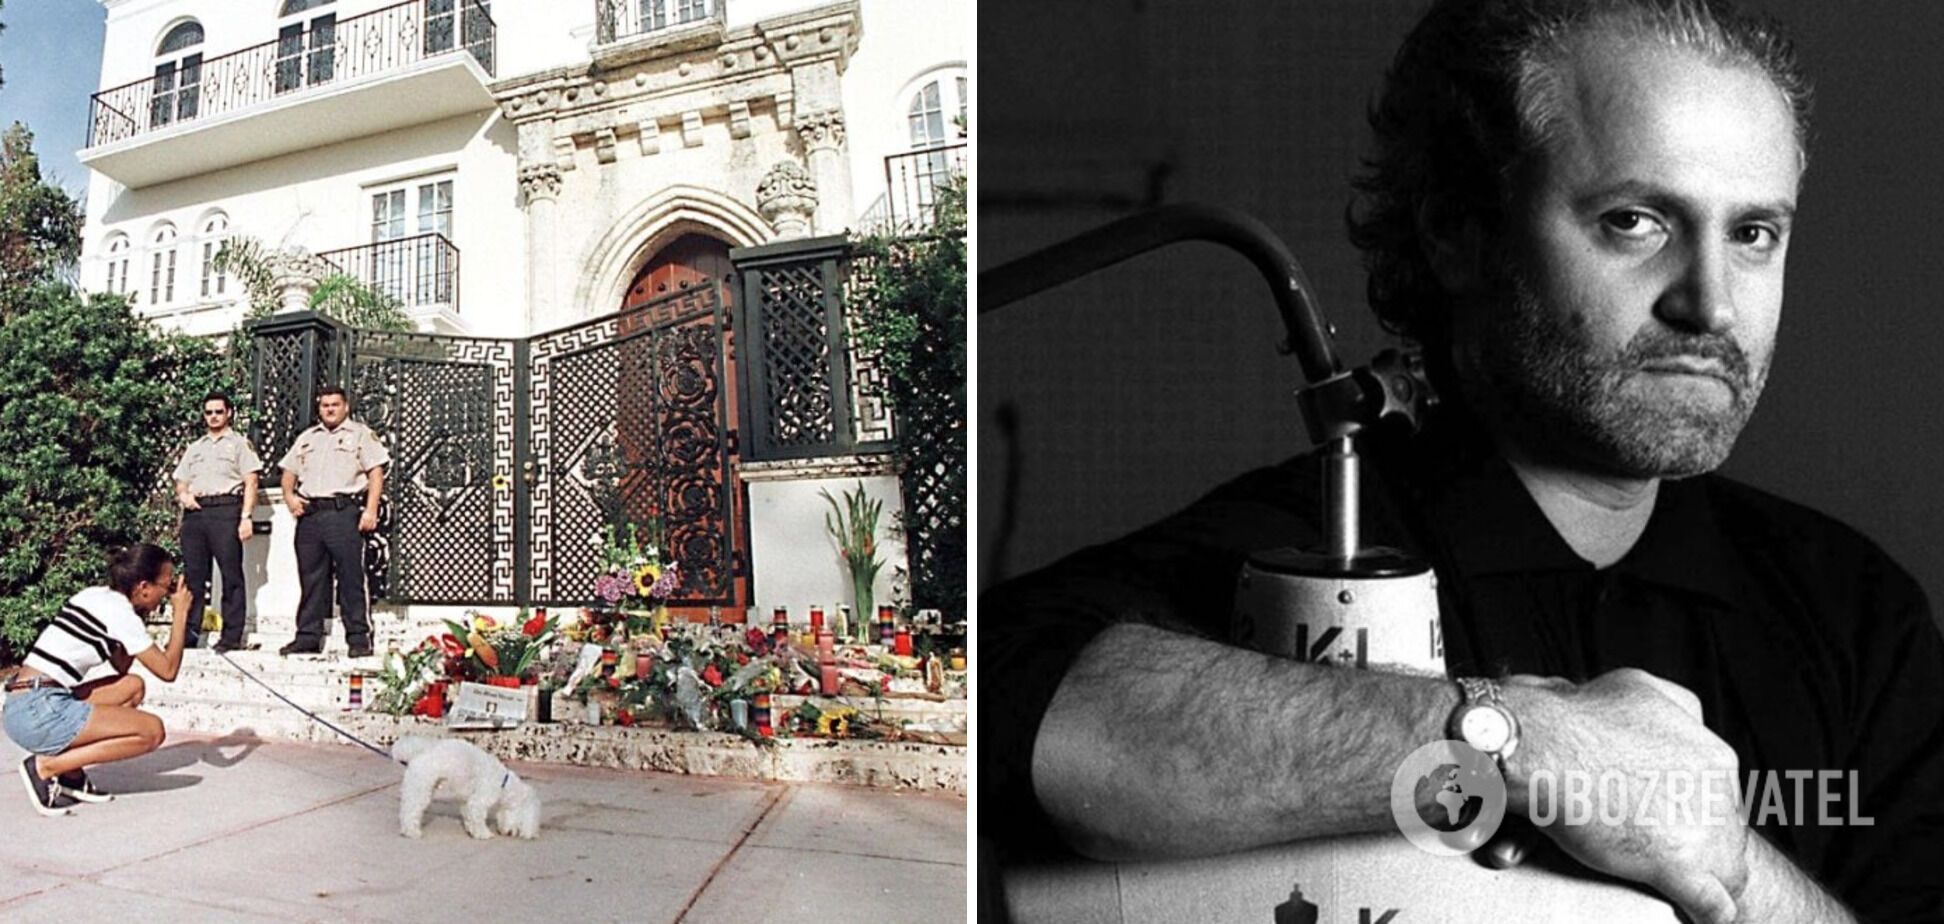 Gianni Versace was murdered outside his own home